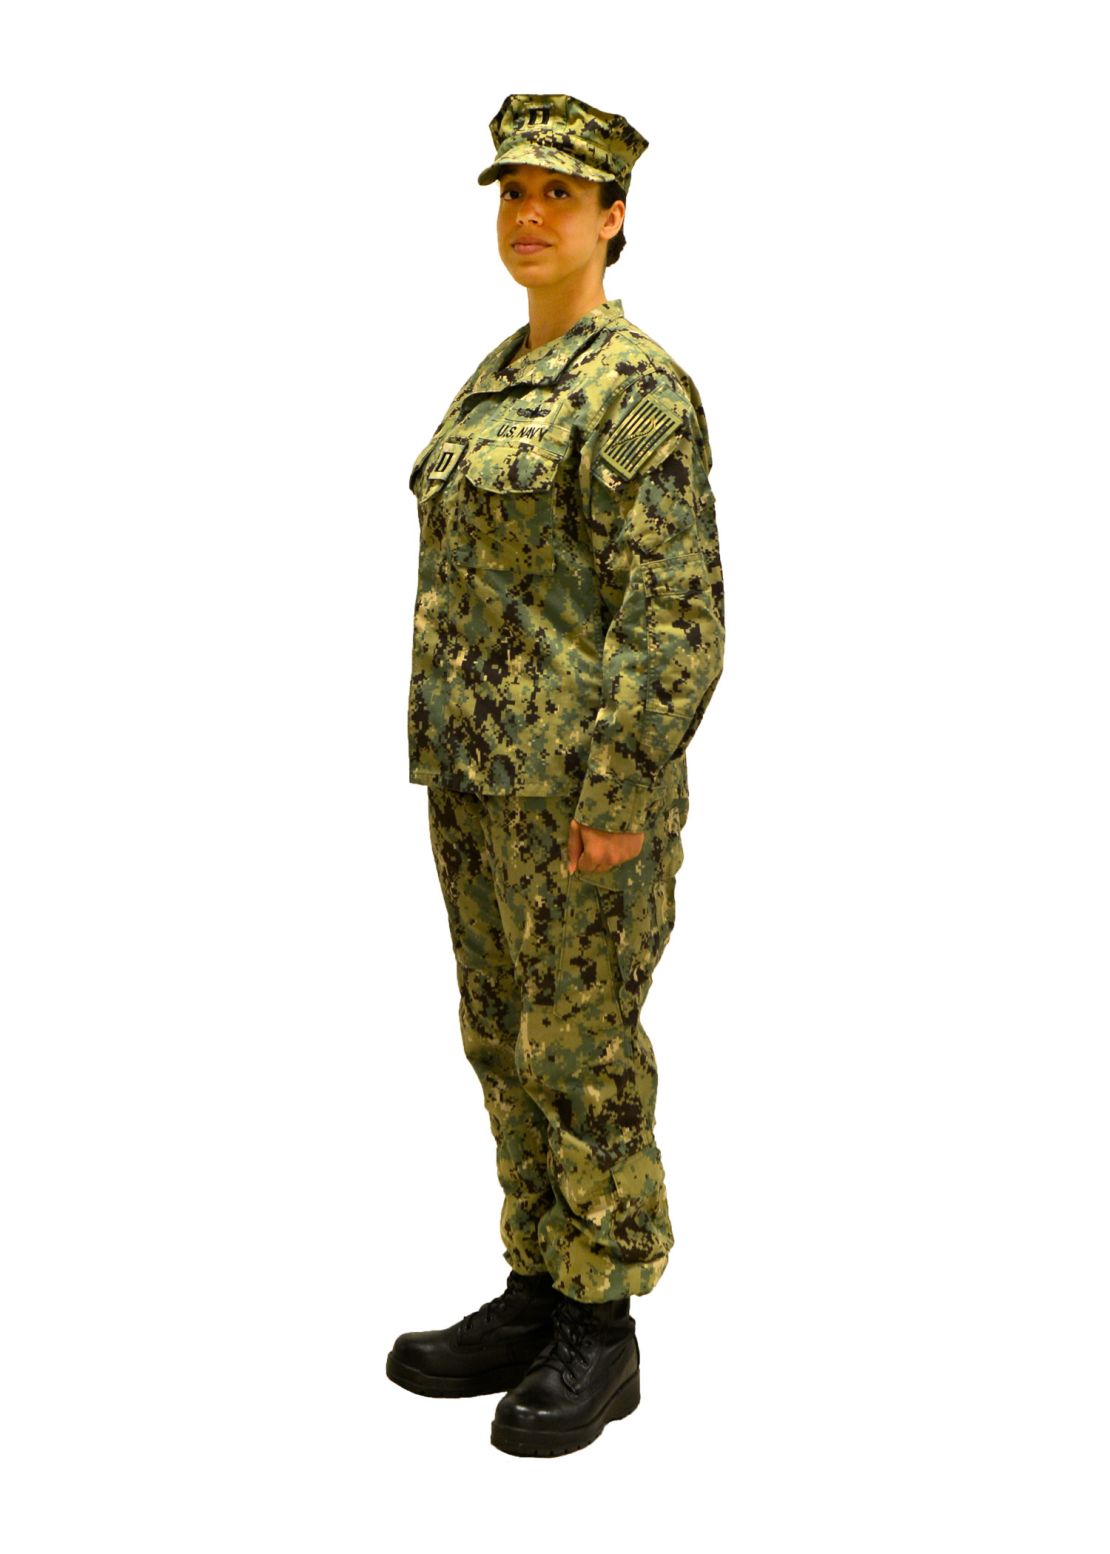 The Navy announced that it will transition to this look as its primary shore working uniform.